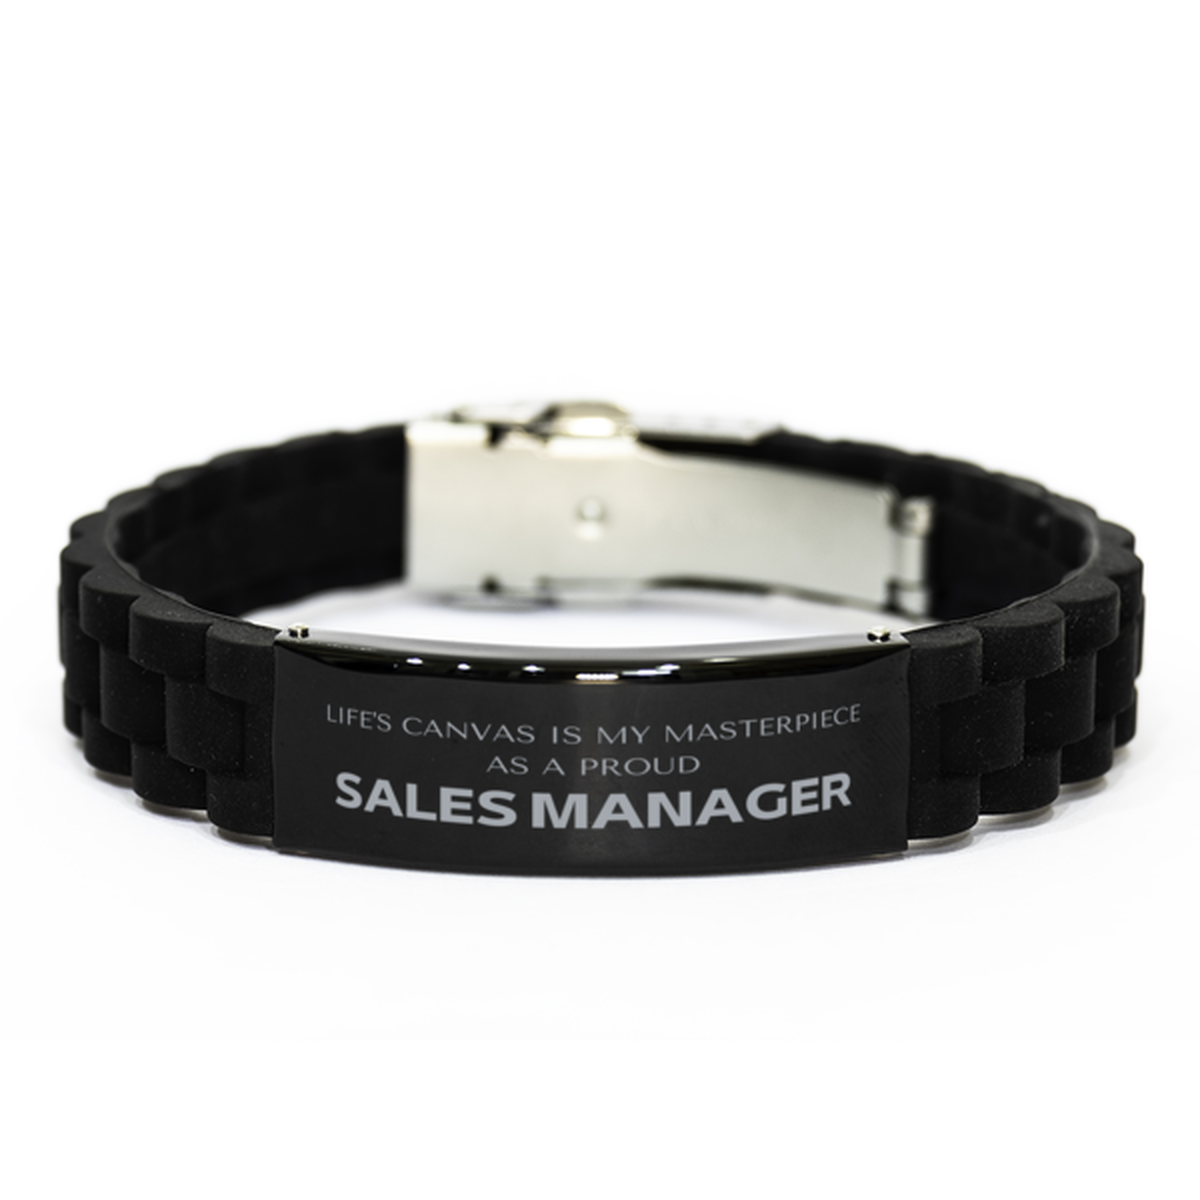 Proud Sales Manager Gifts, Life's canvas is my masterpiece, Epic Birthday Christmas Unique Black Glidelock Clasp Bracelet For Sales Manager, Coworkers, Men, Women, Friends